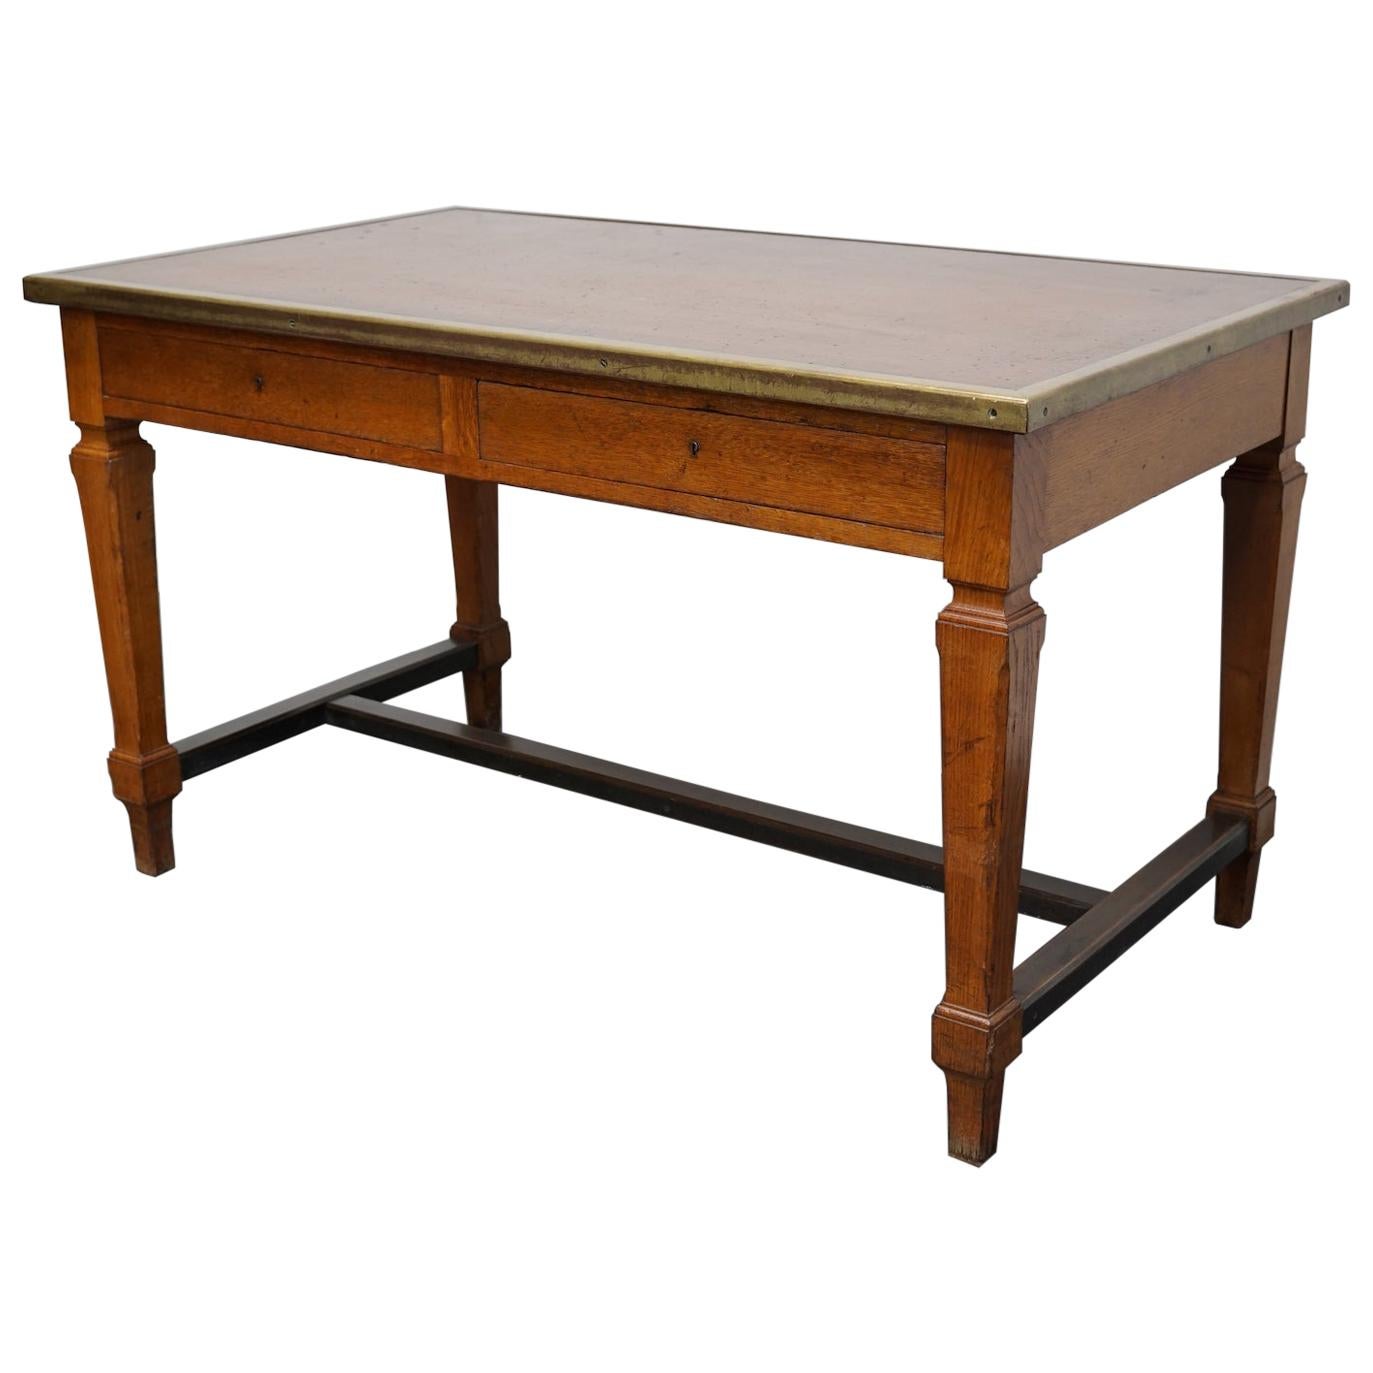 Antique Oak French Art Deco Style Desk or Writing Table, 1920s